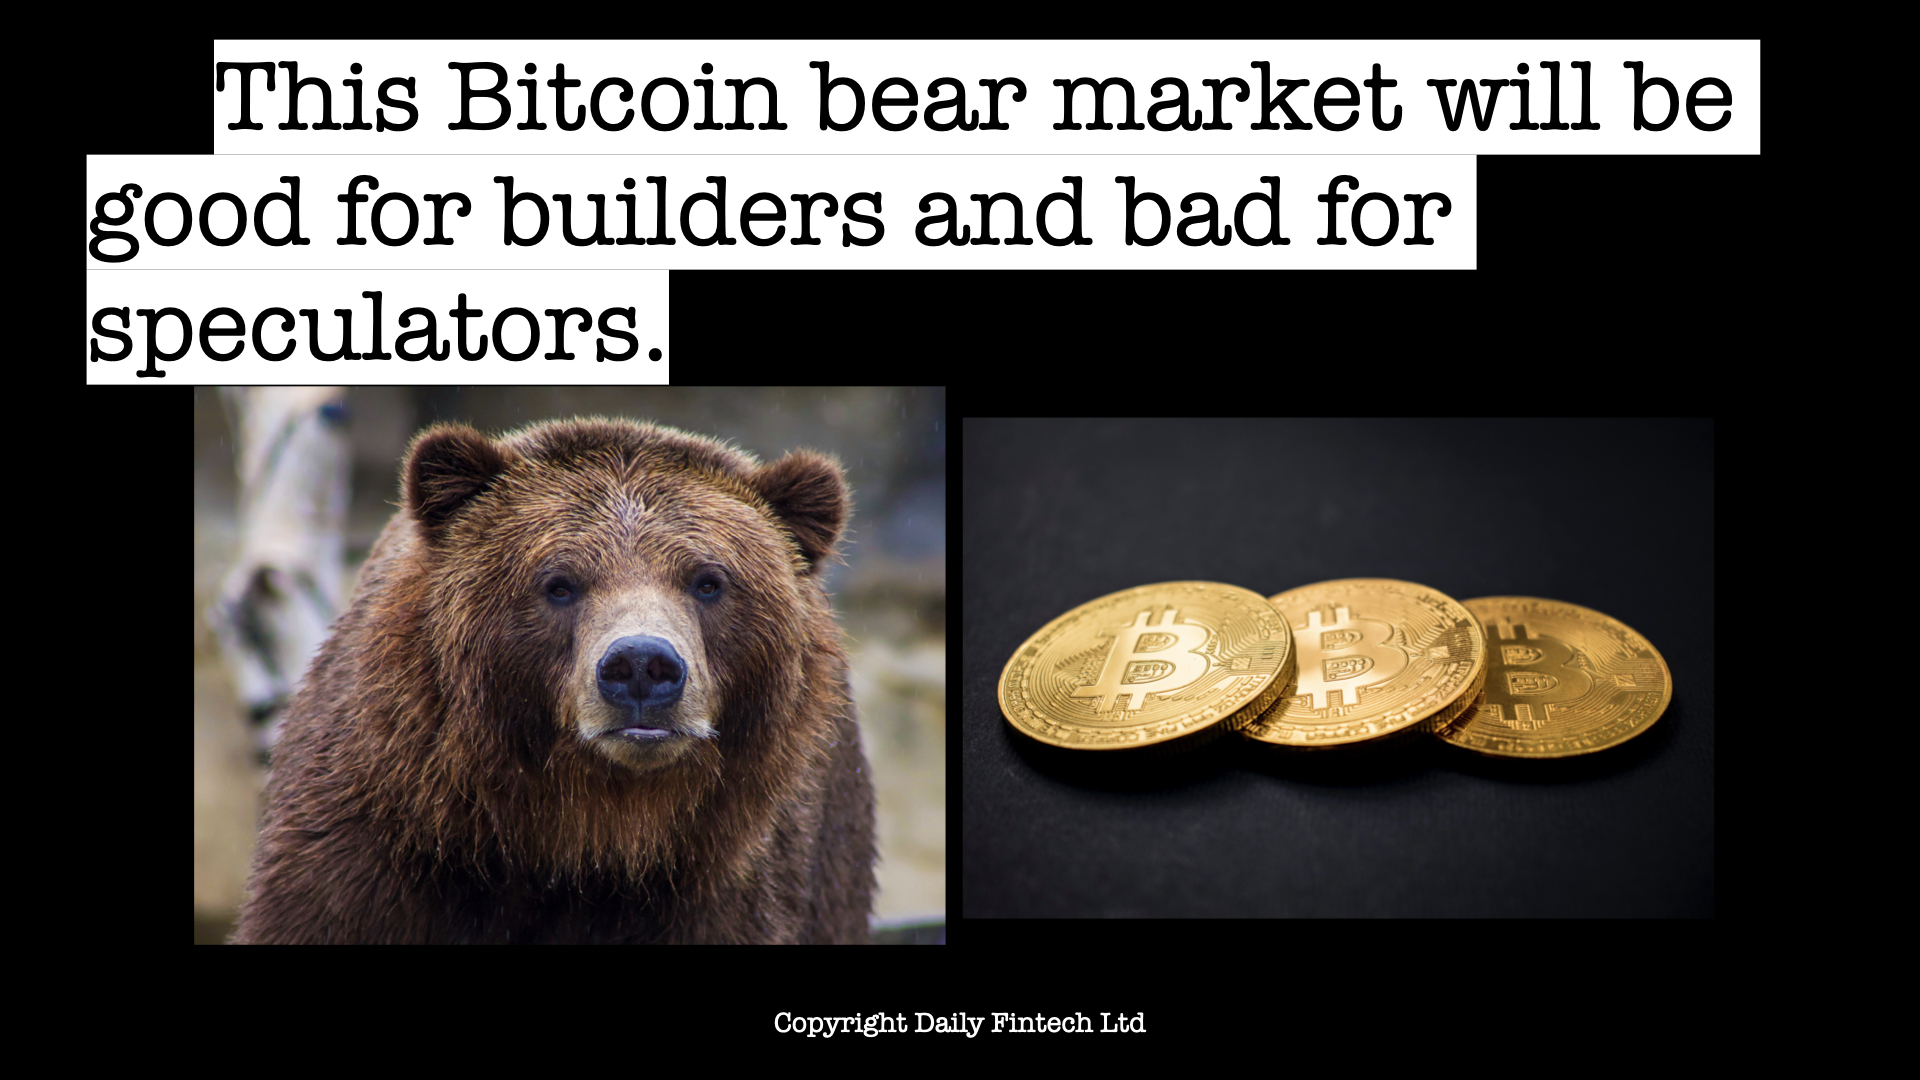 This Bitcoin bear market will be good for builders and bad for speculators.